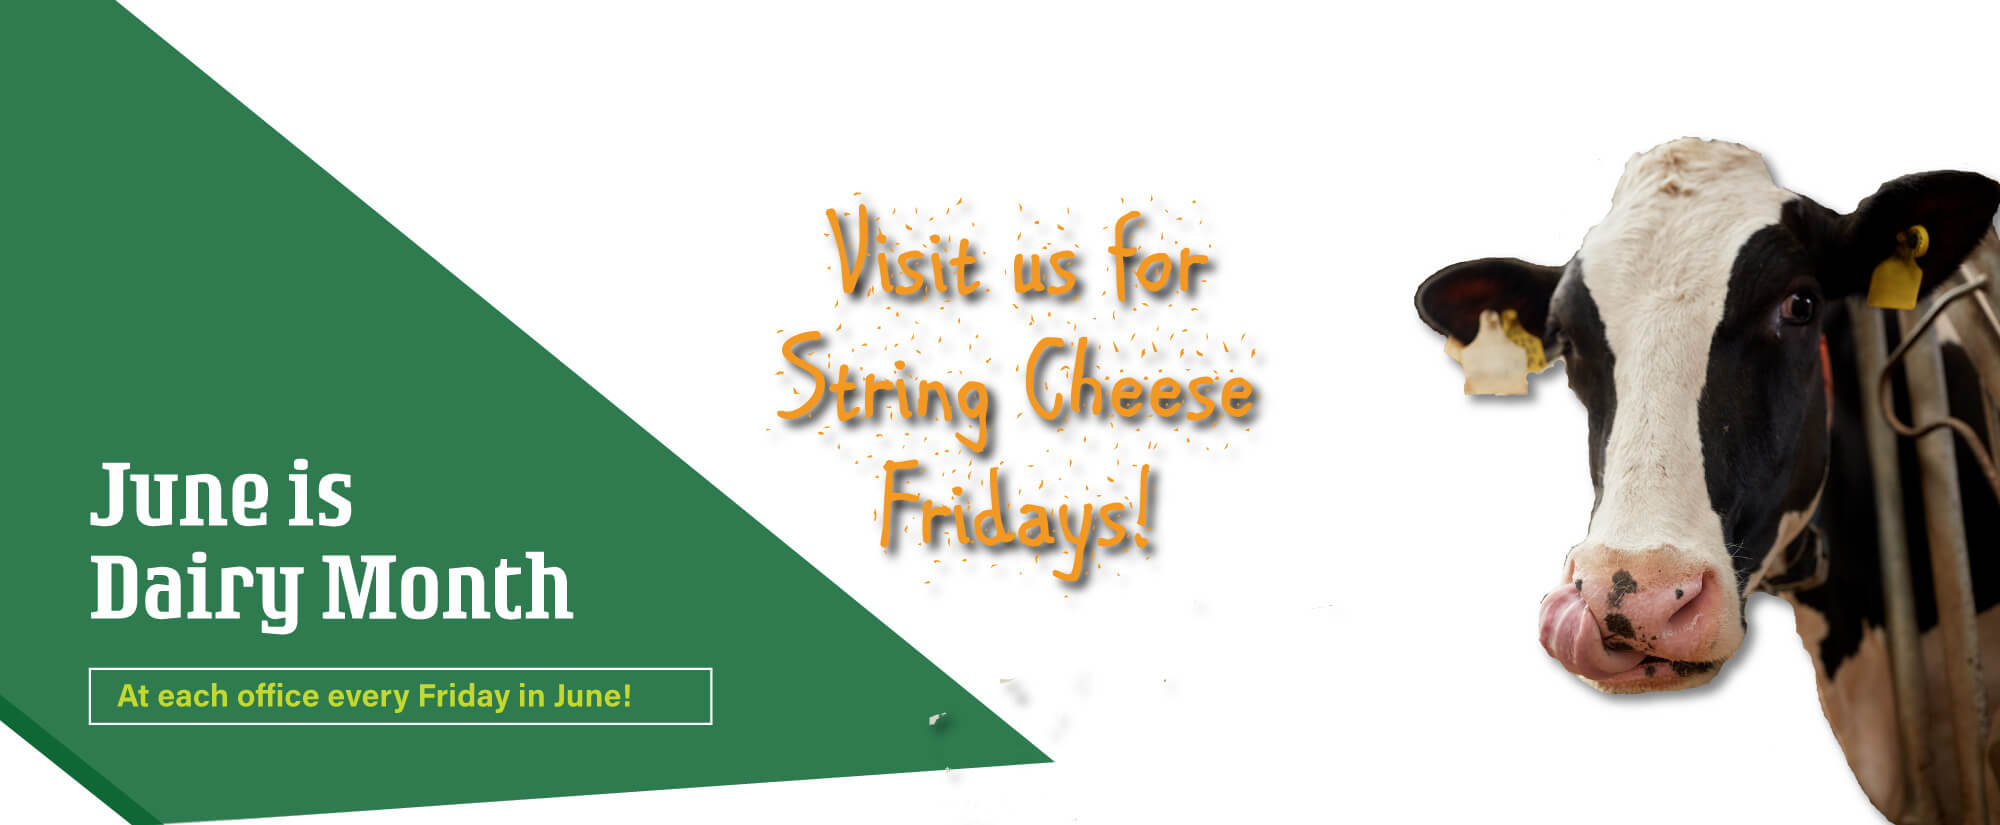 June is Dairy Month at each office every Friday in June! Visit us for String Cheese Fridays!